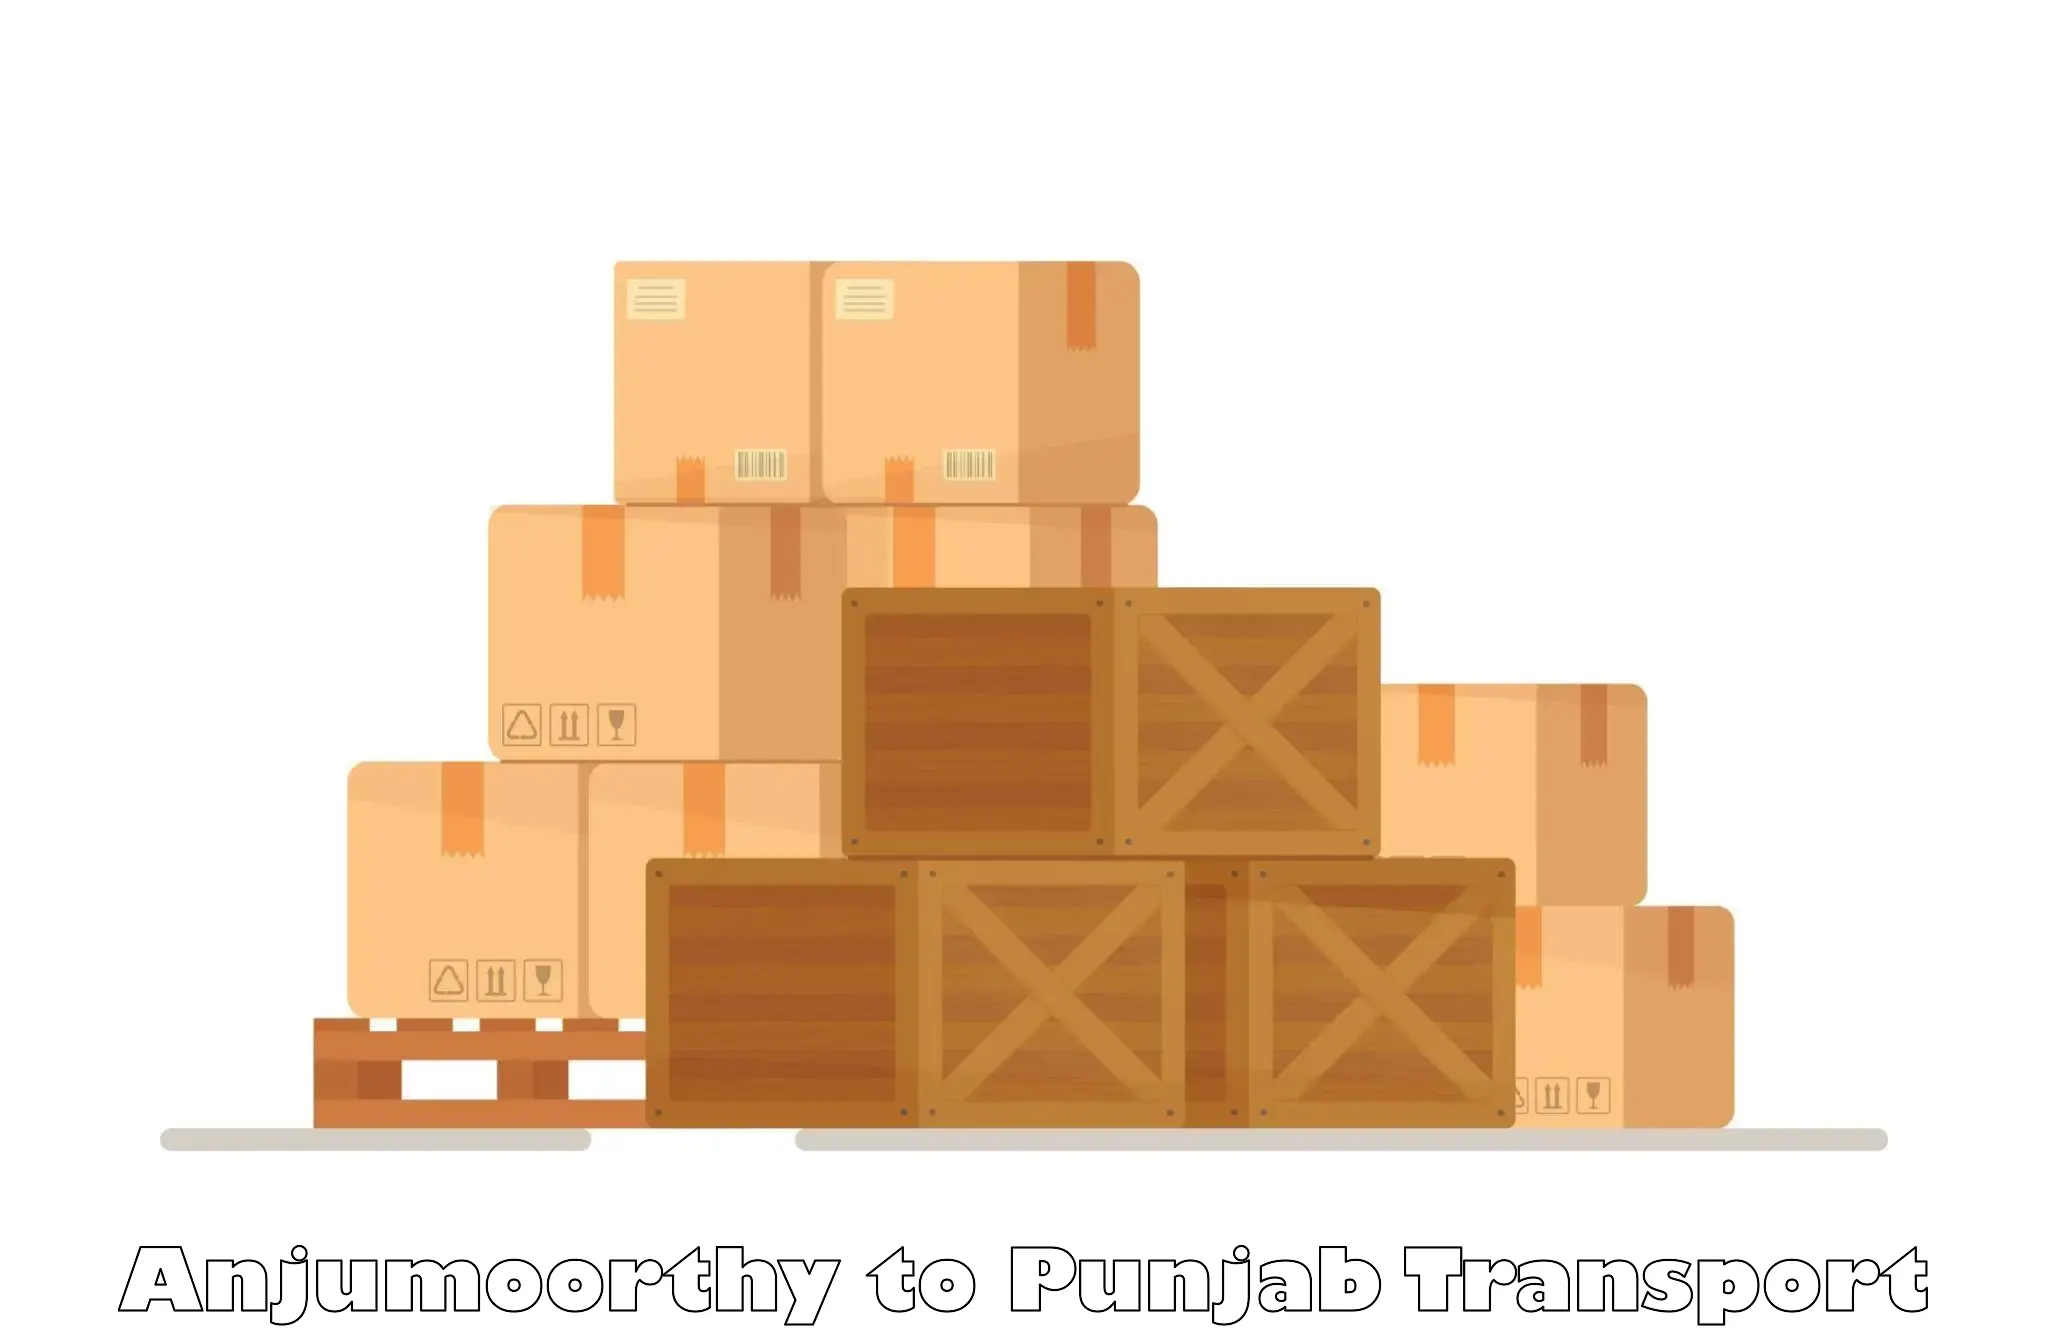 Land transport services Anjumoorthy to Mohali